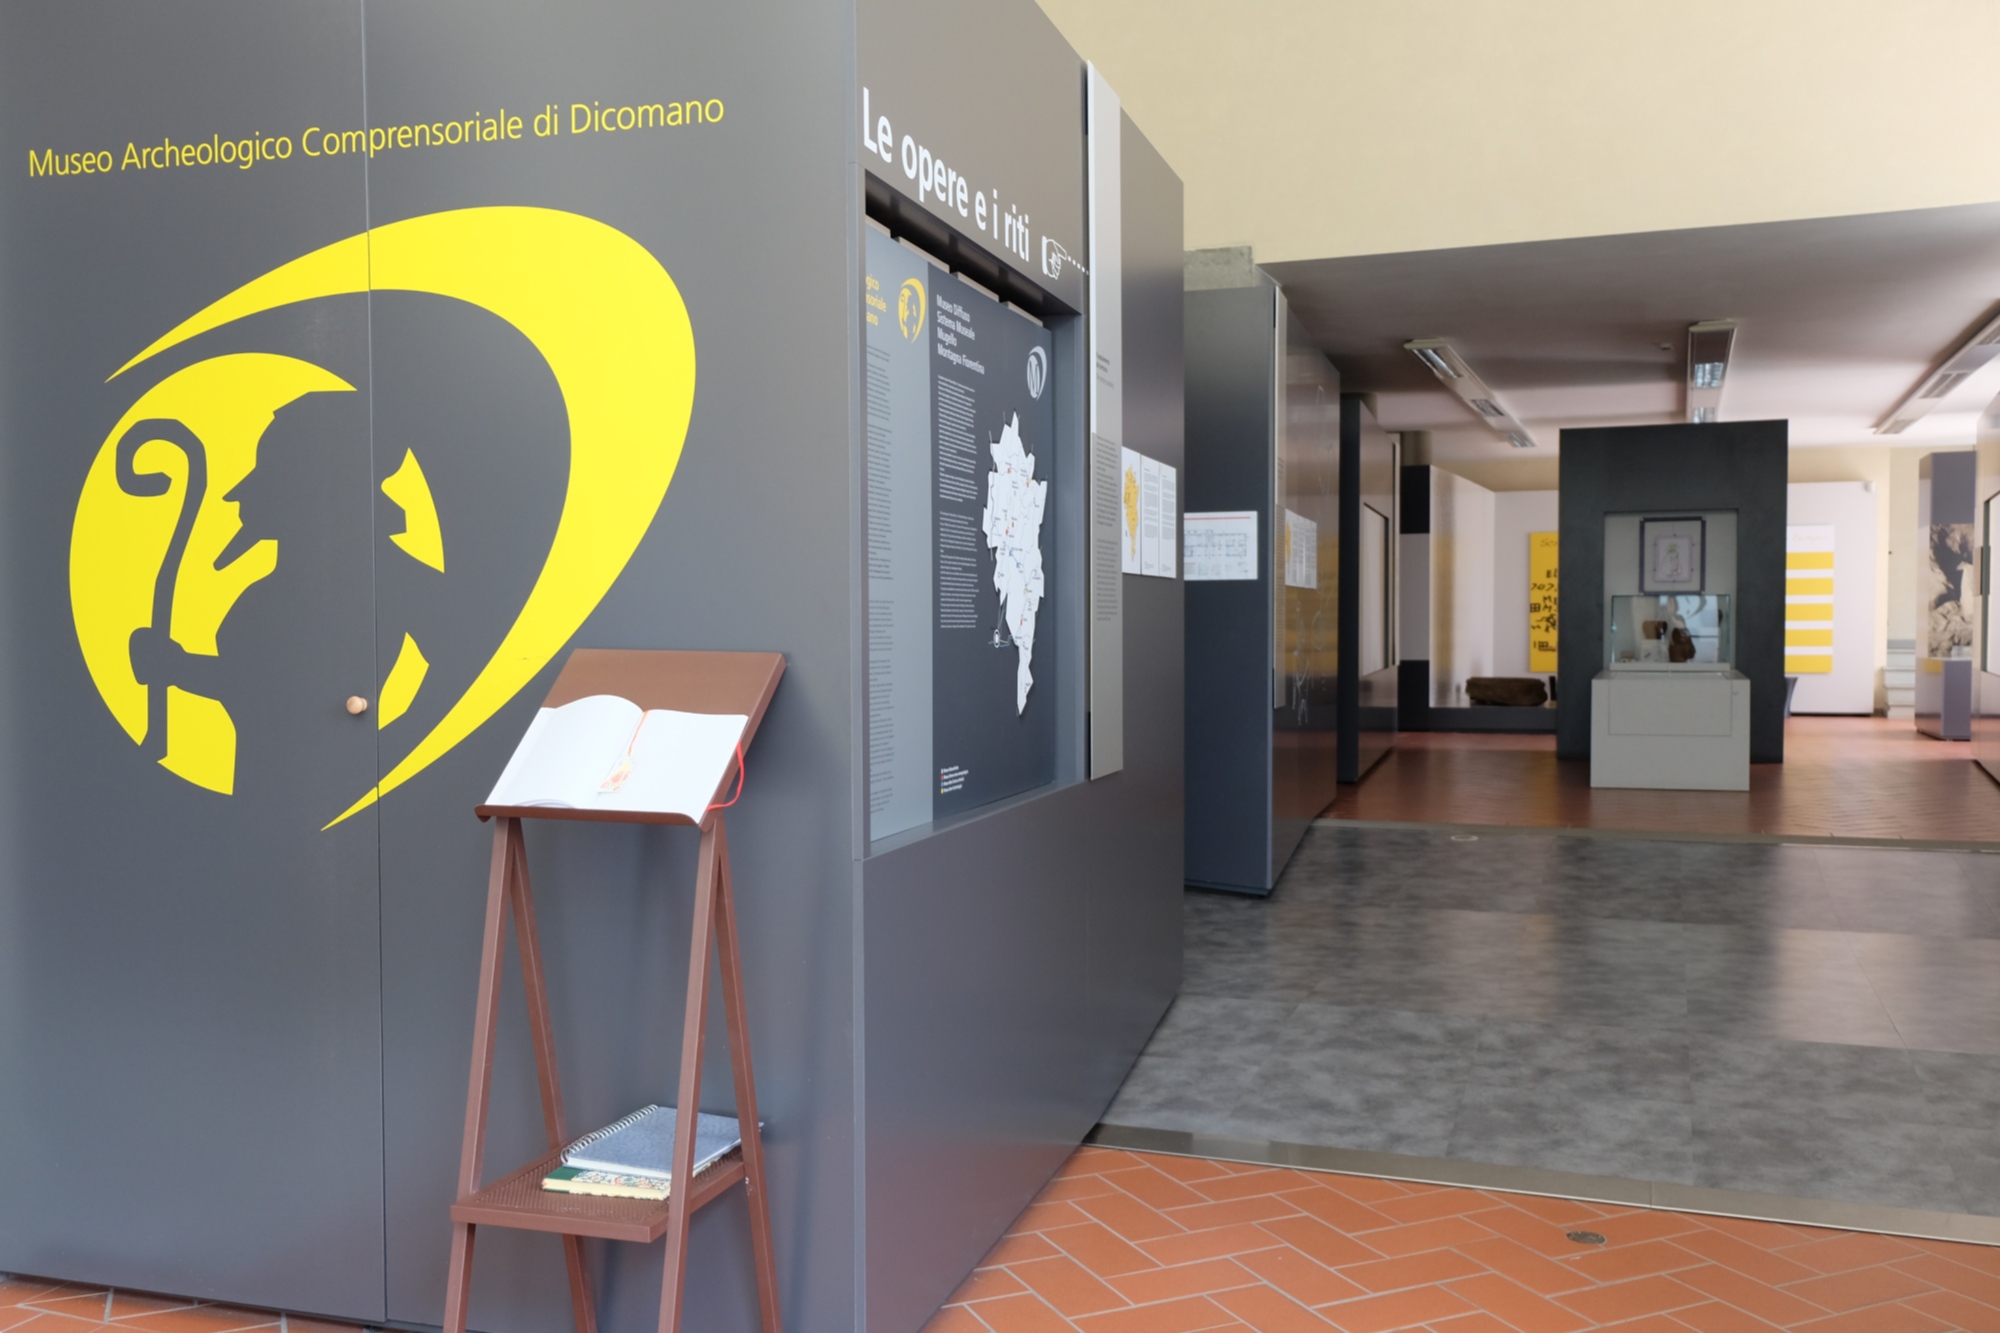 The Dicomano district archaeological museum